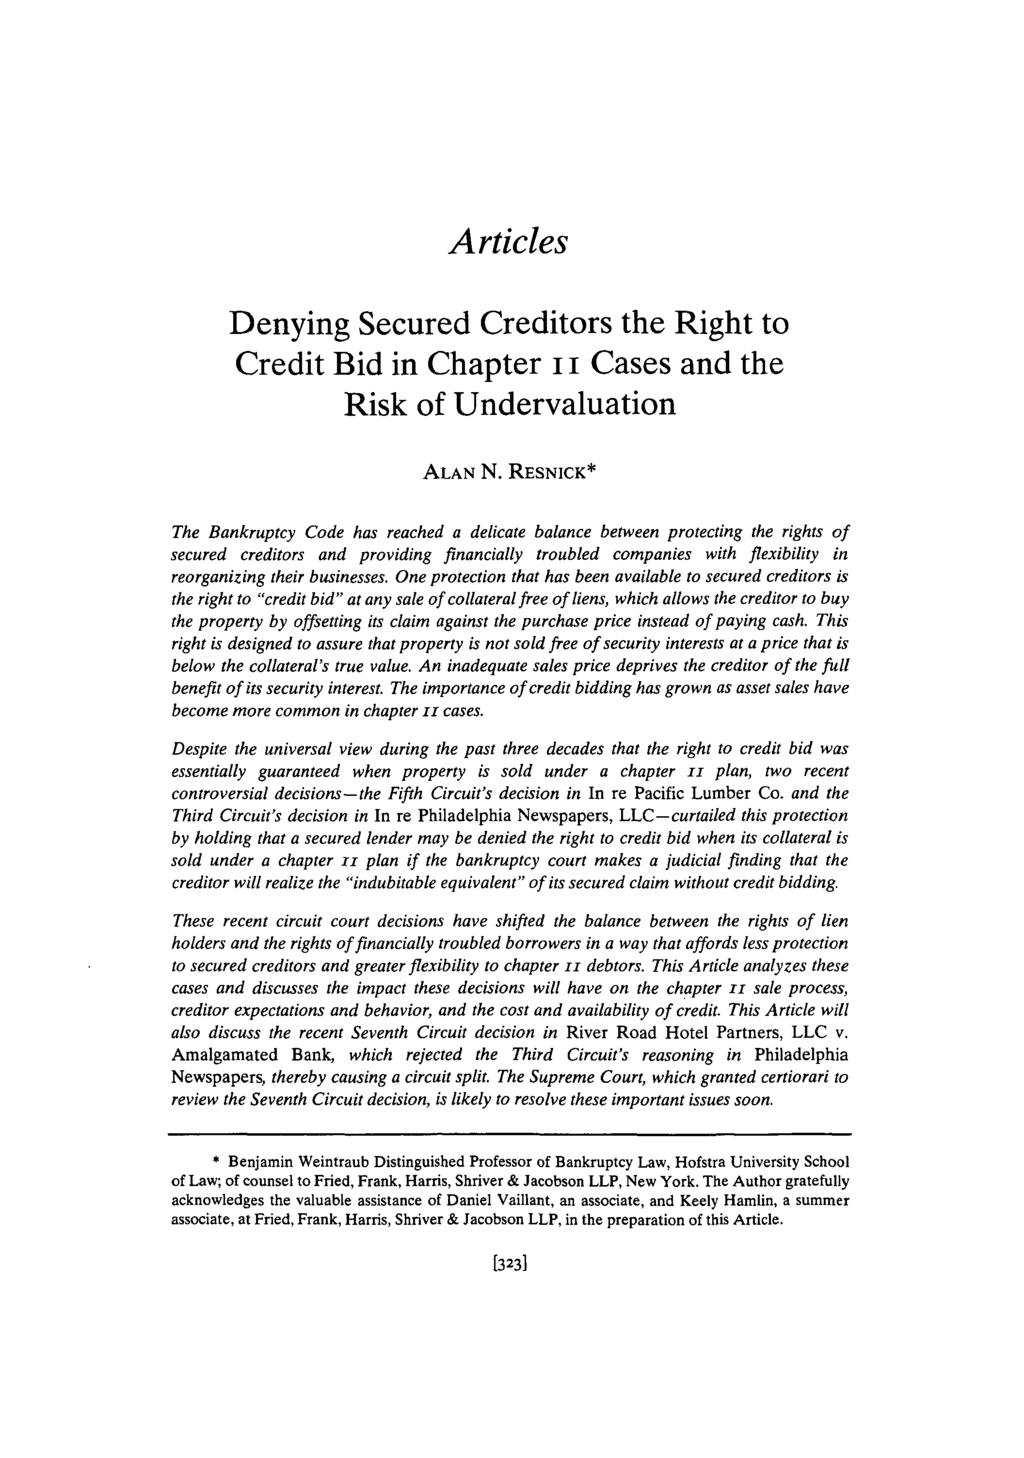 Articles Denying Secured Creditors the Right to Credit Bid in Chapter i i Cases and the Risk of Undervaluation ALAN N.